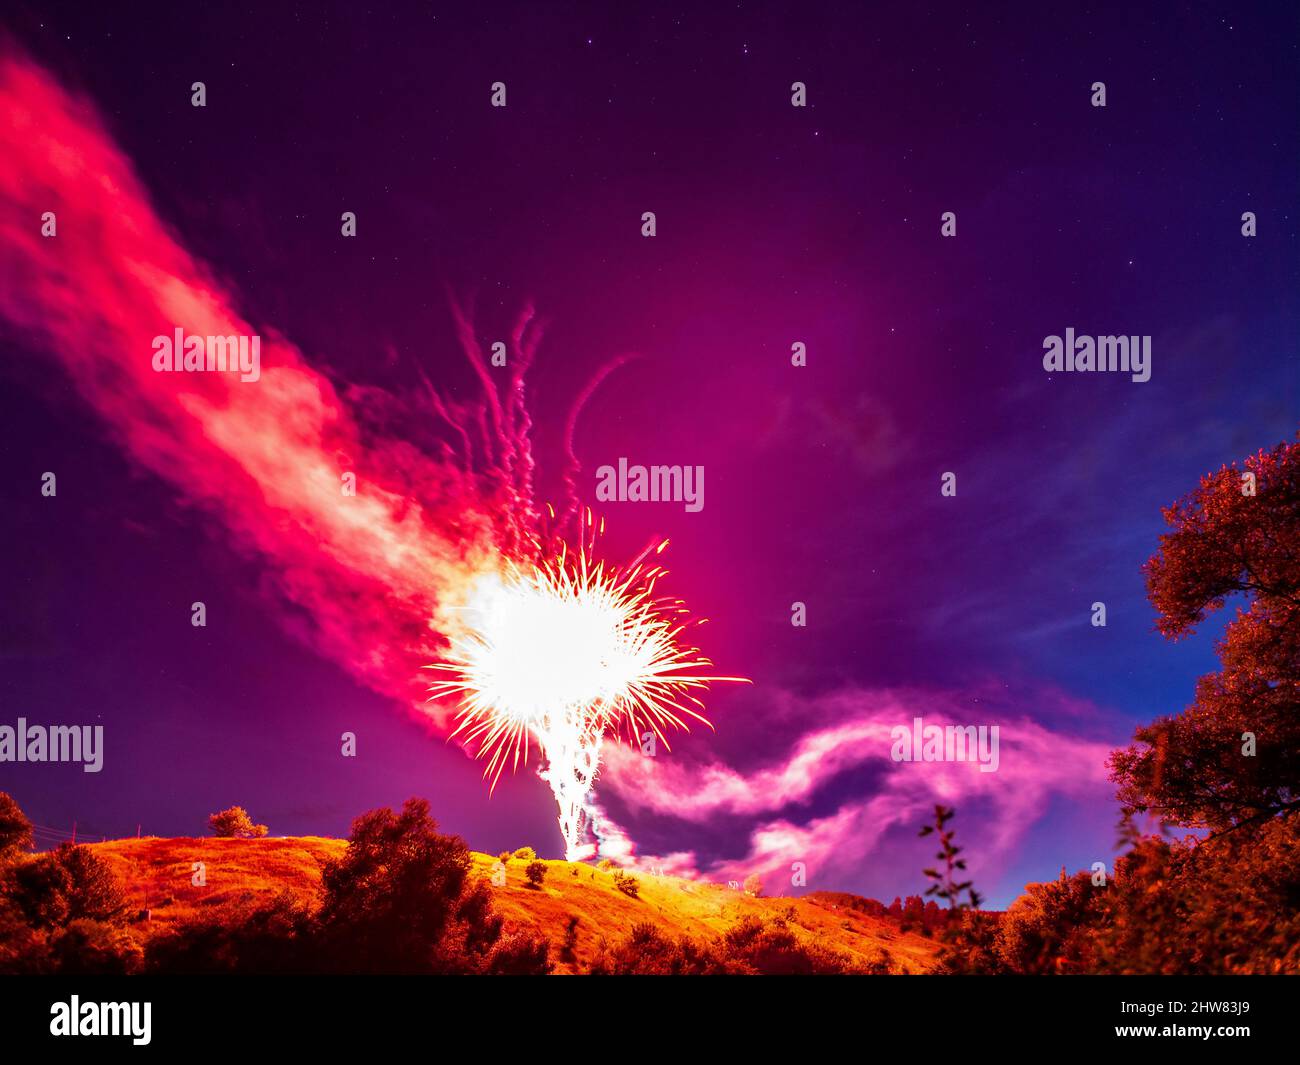 Bright red fireworks over a hill in a natural landscape at night against a starry sky, a rural holiday landscape Stock Photo